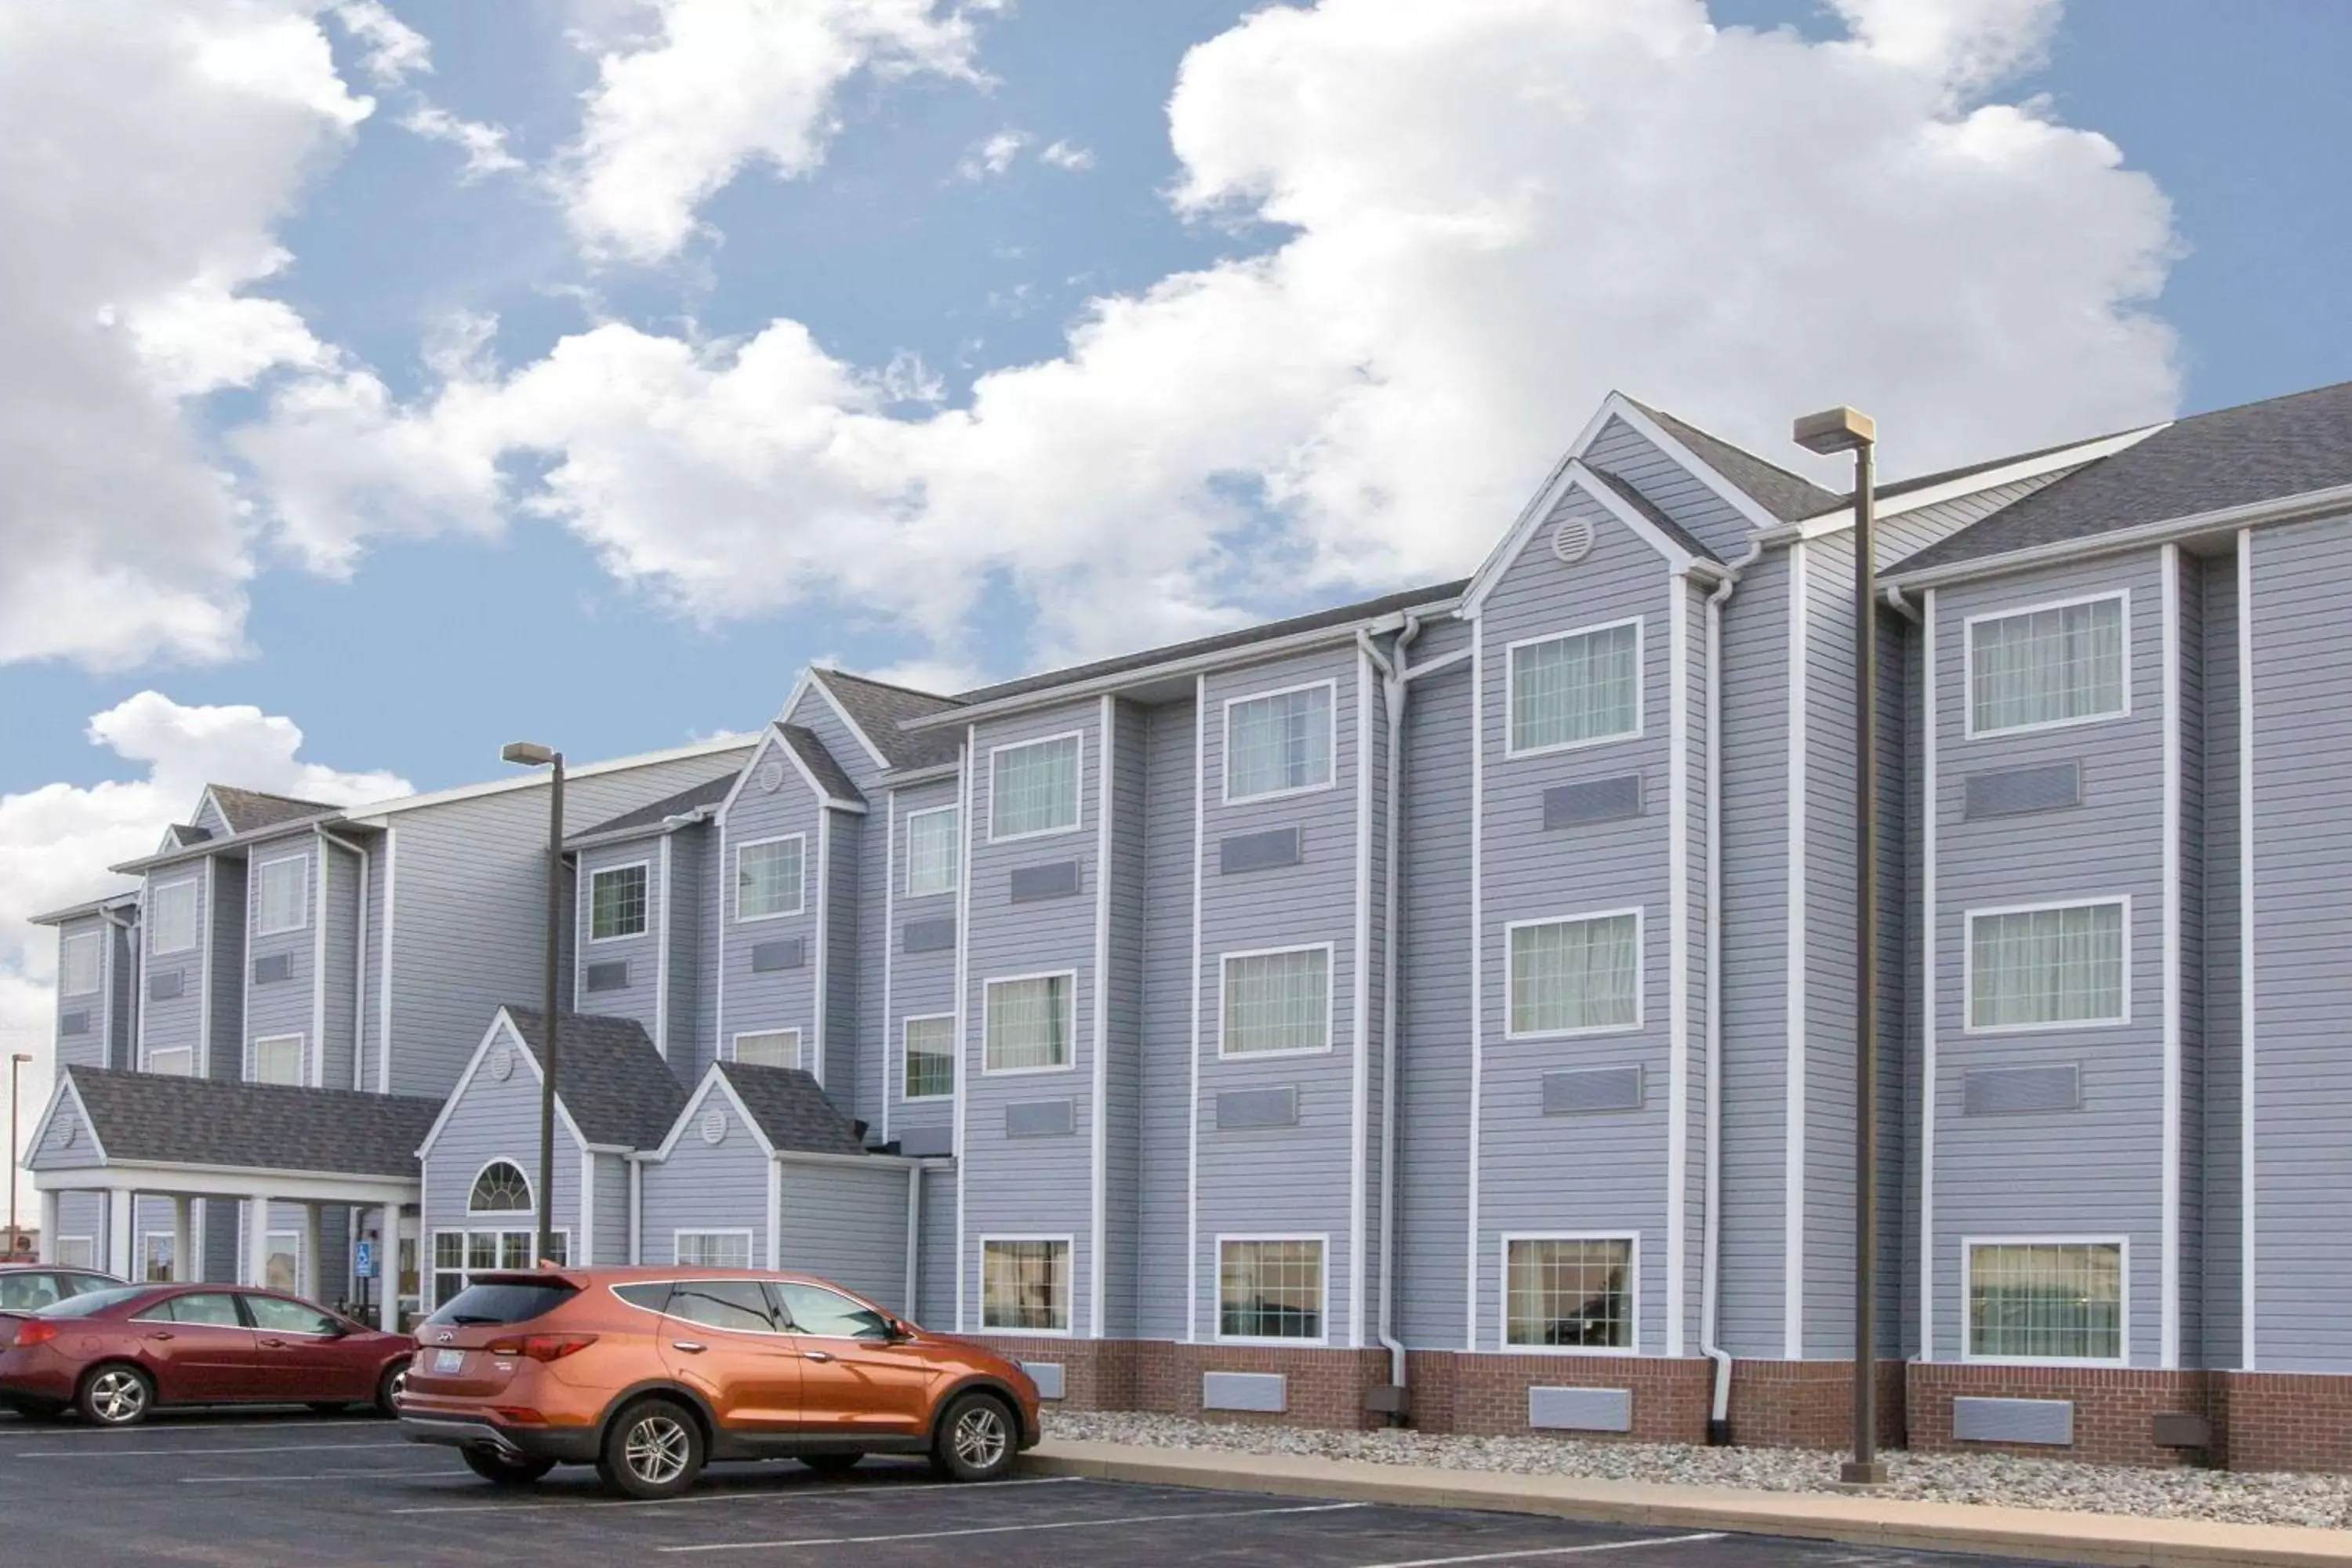 Property Building in Microtel Inn & Suites by Wyndham Delphos